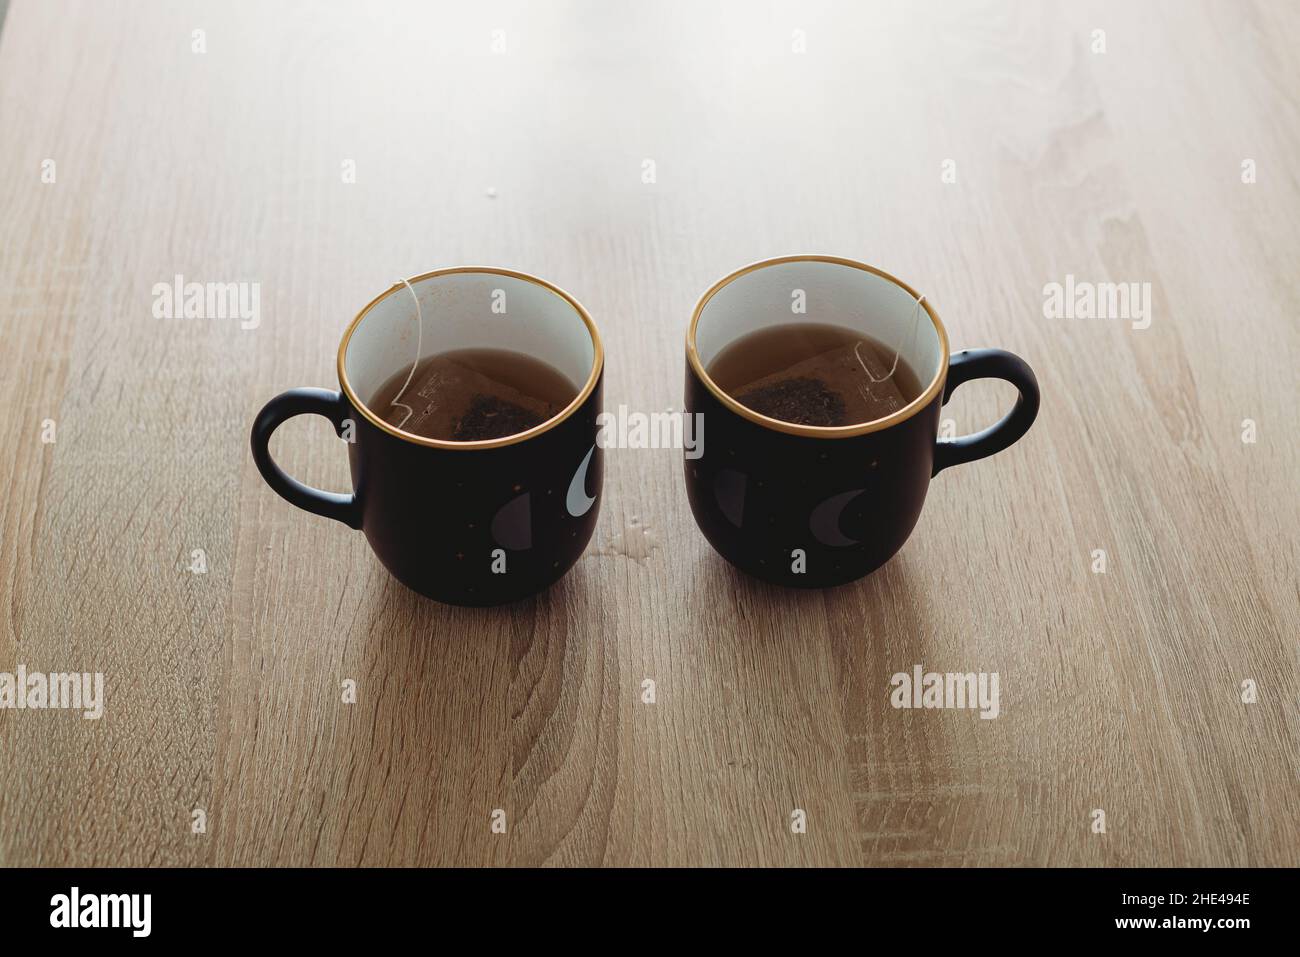 Two cups of tea on the wooden table Stock Photo